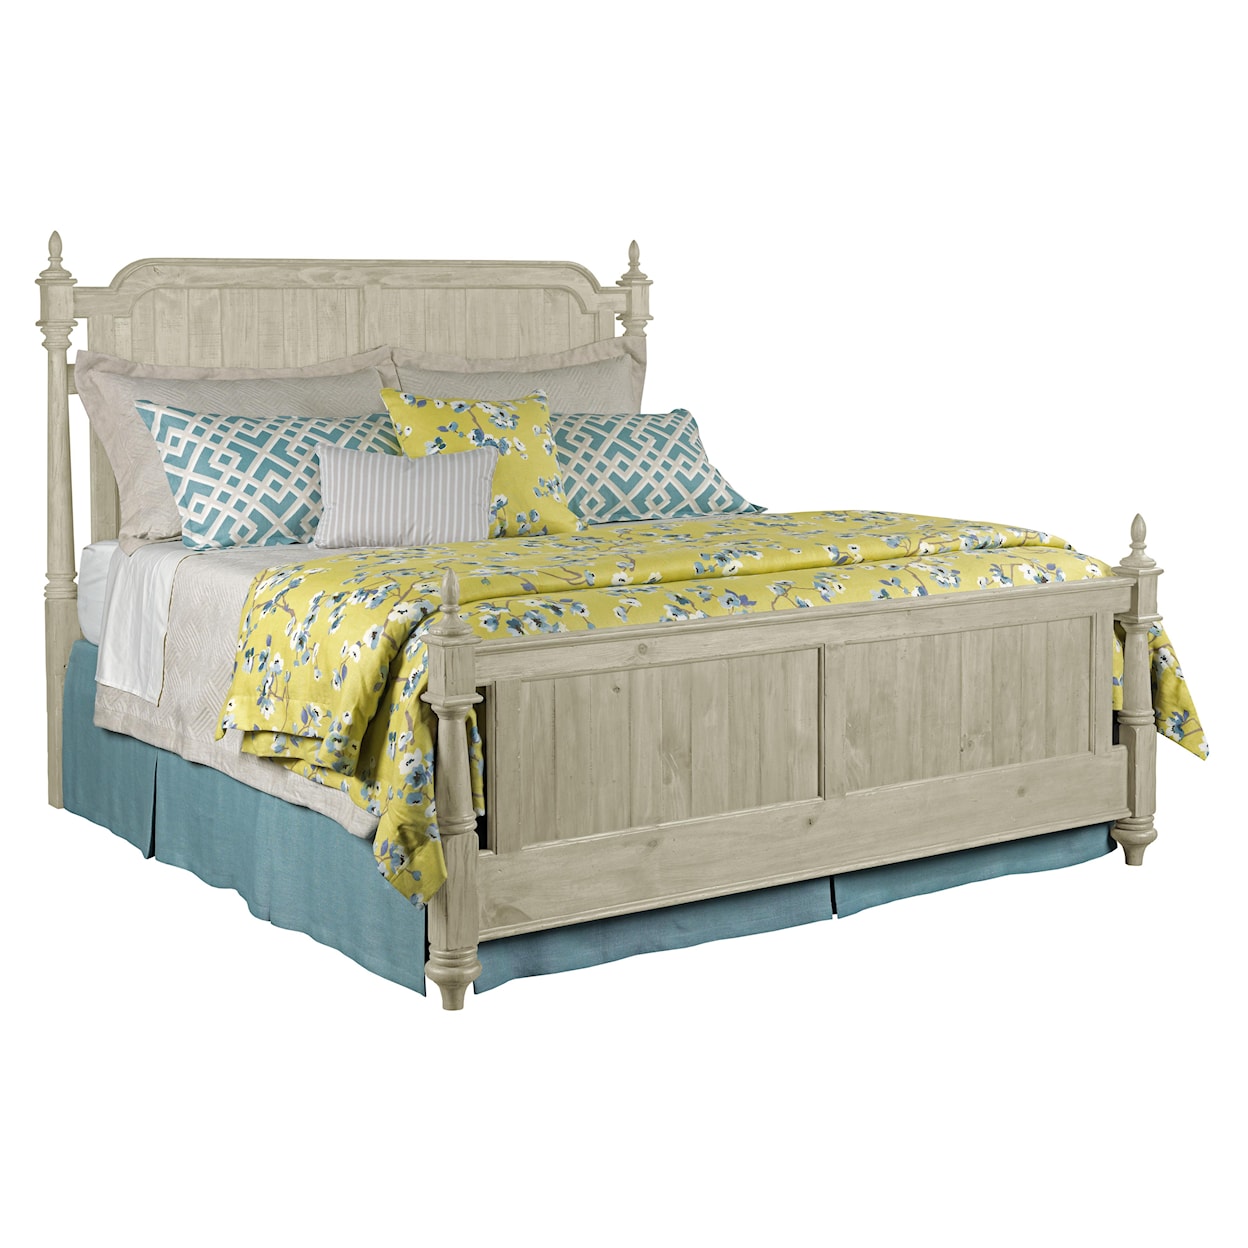 Kincaid Furniture Weatherford Westland Queen Bed Package